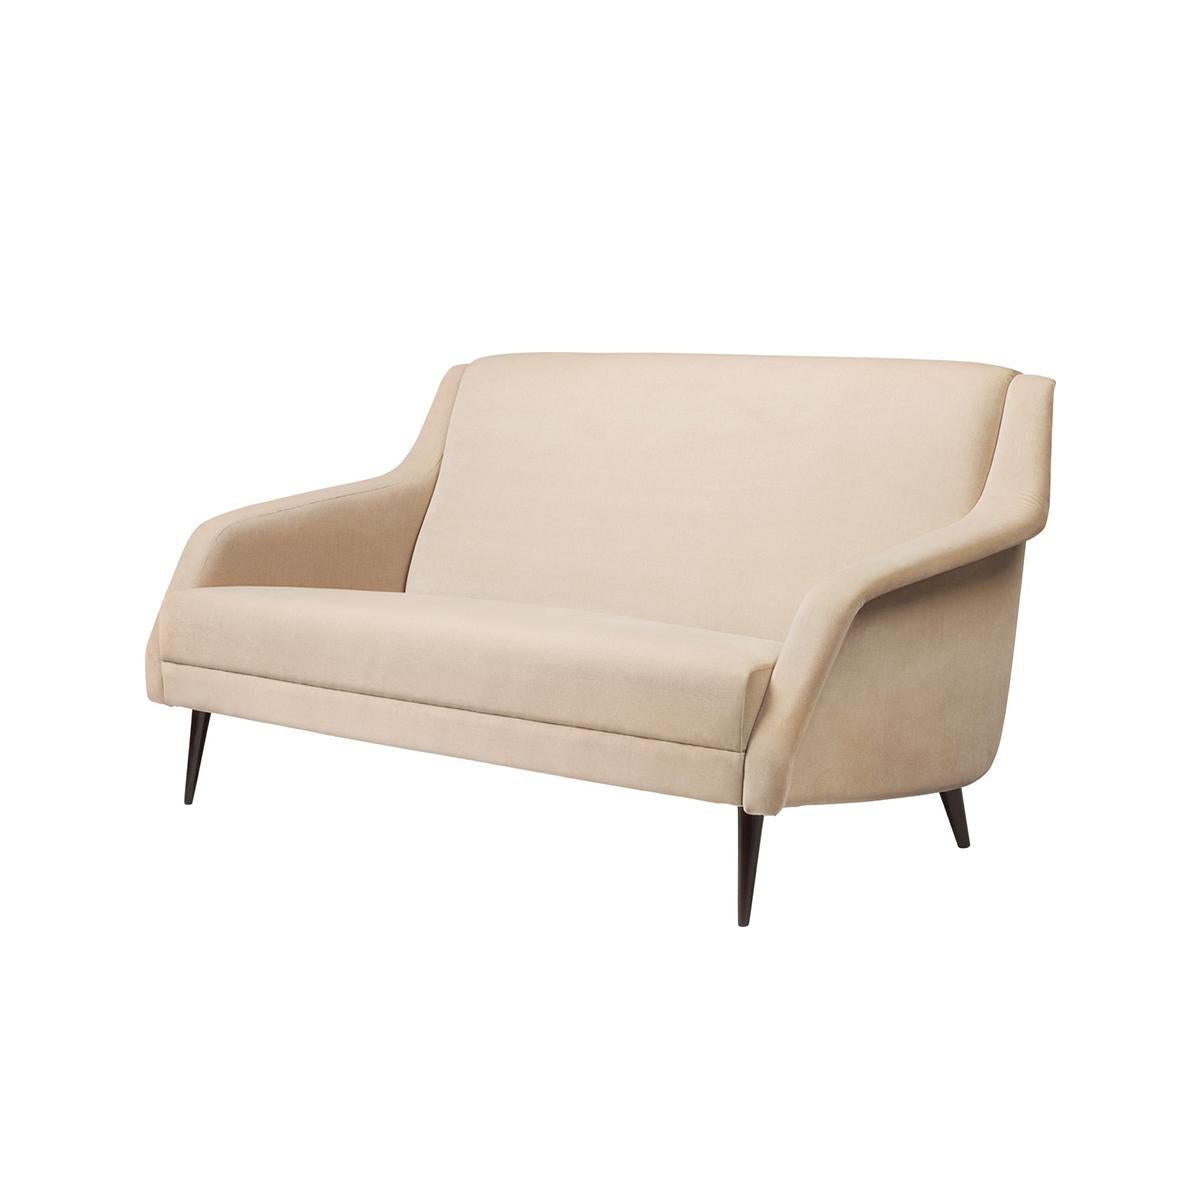 Sofa designed by Carlo de Carli in 1954, features the elegantly Minimalist design style, typical of the era.

The CDC.2 Sofa meets the ground in a graceful and slender way; its arms swooping like wings, giving the furniture a sense of poetic